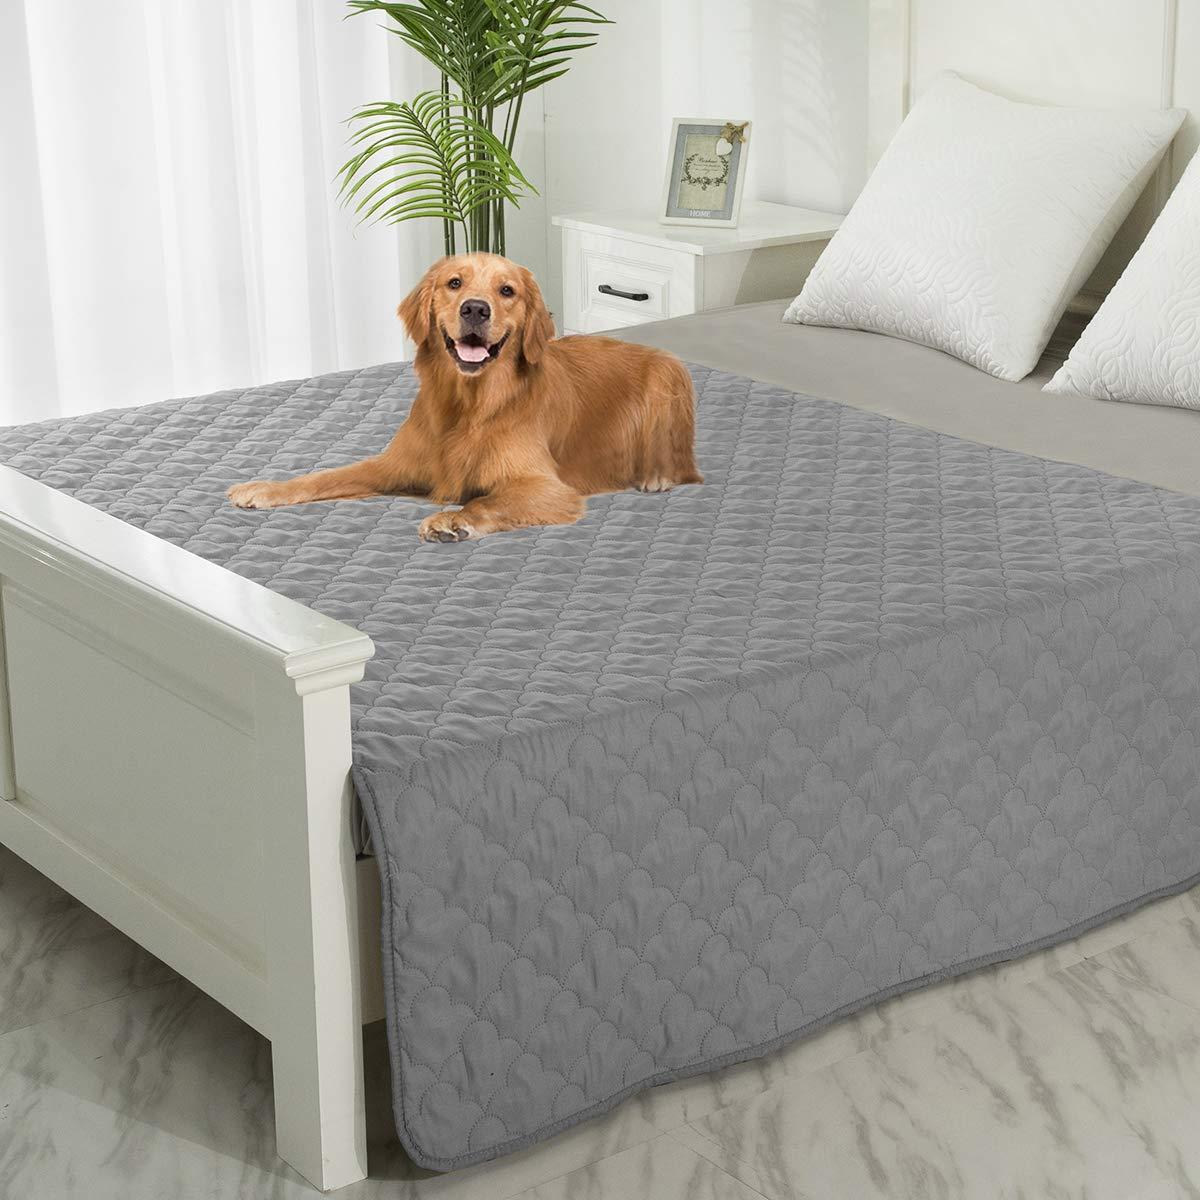 SPXTEX Dog Bed Cover Washable Couch Cover Non-Slip Sofa Cover Furniture Protector Cover Reusable Incontinence Bed Underpads for Pets Kids Children Dog Cat 68\\\